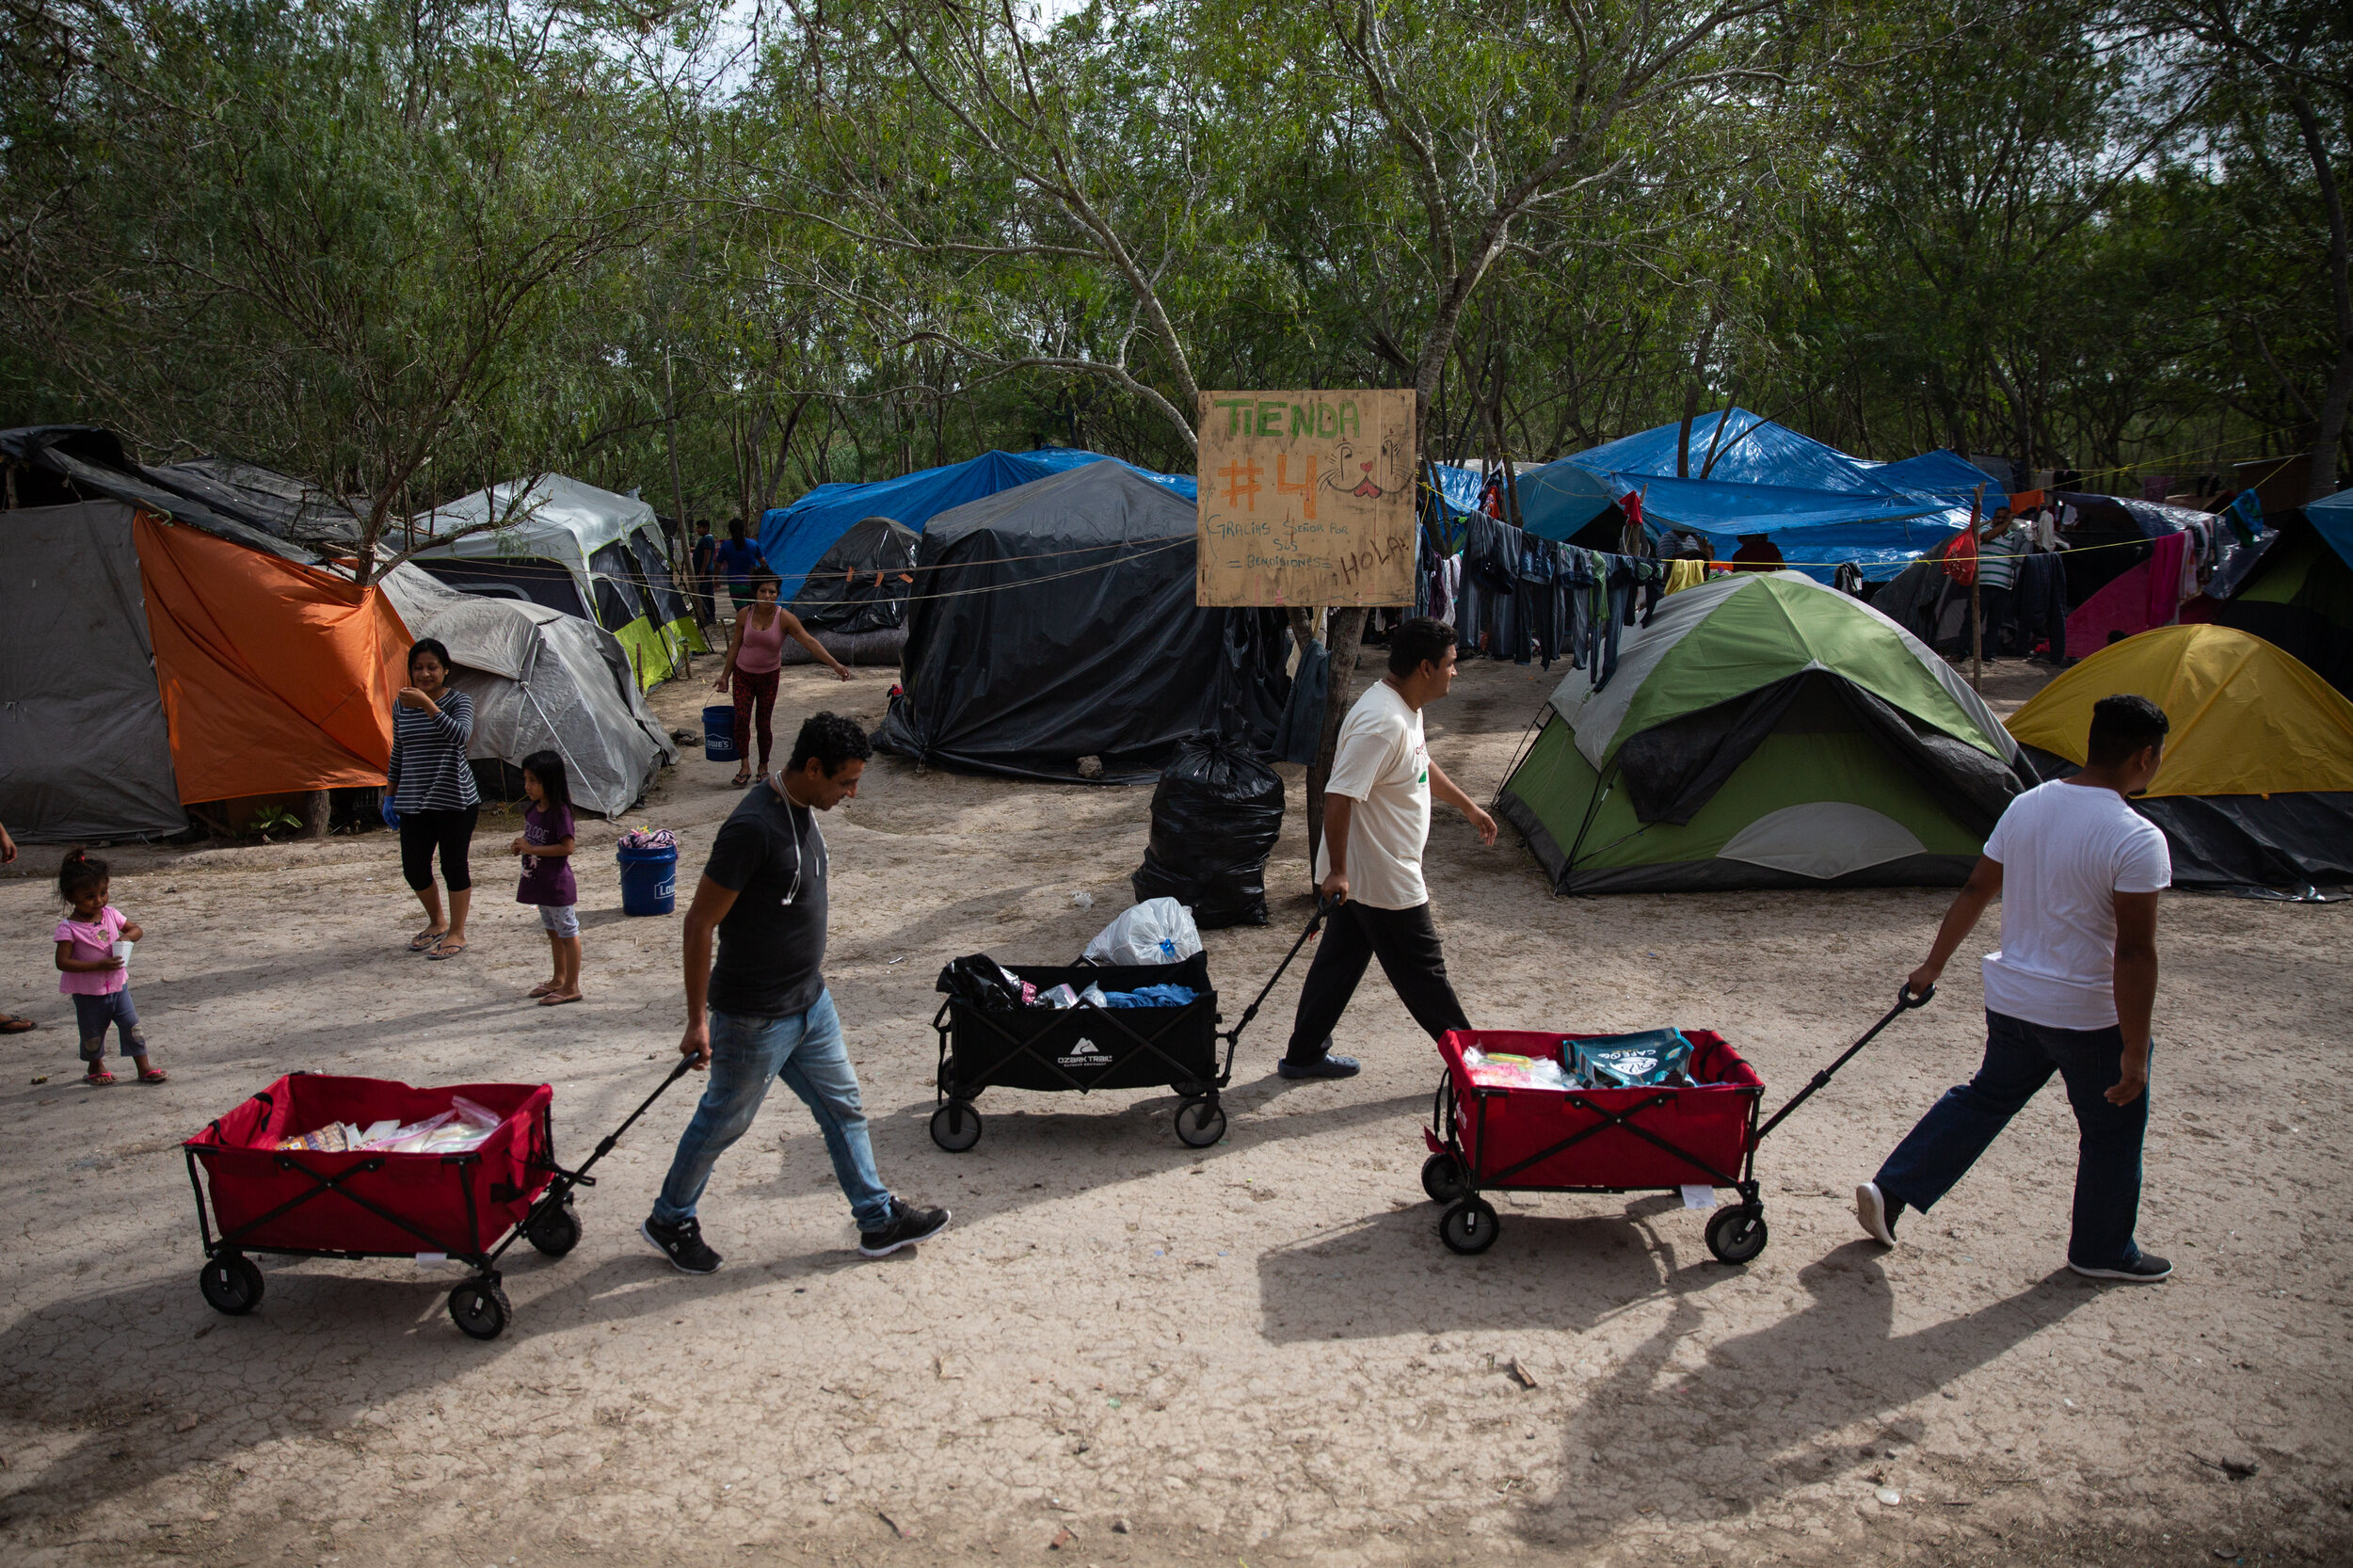  Donations brought over the border from volunteer group Angry Tias and Abuelas are wheeled into the Matamoros migrant camp on Jan. 15, 2020. The encampment relies almost entirely on the efforts of volunteer groups and religious charities for food, te